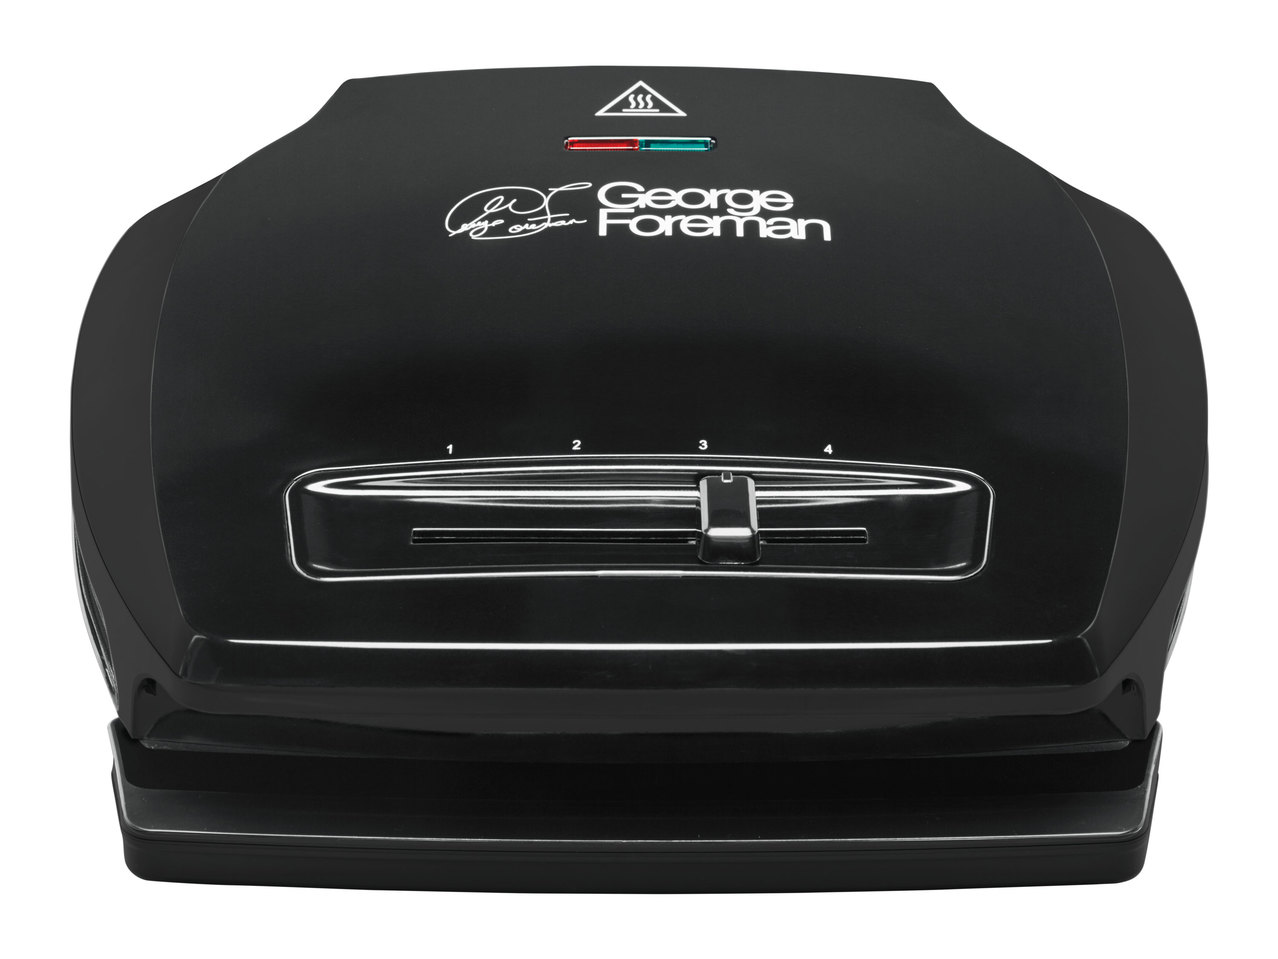 George Foreman Grill1